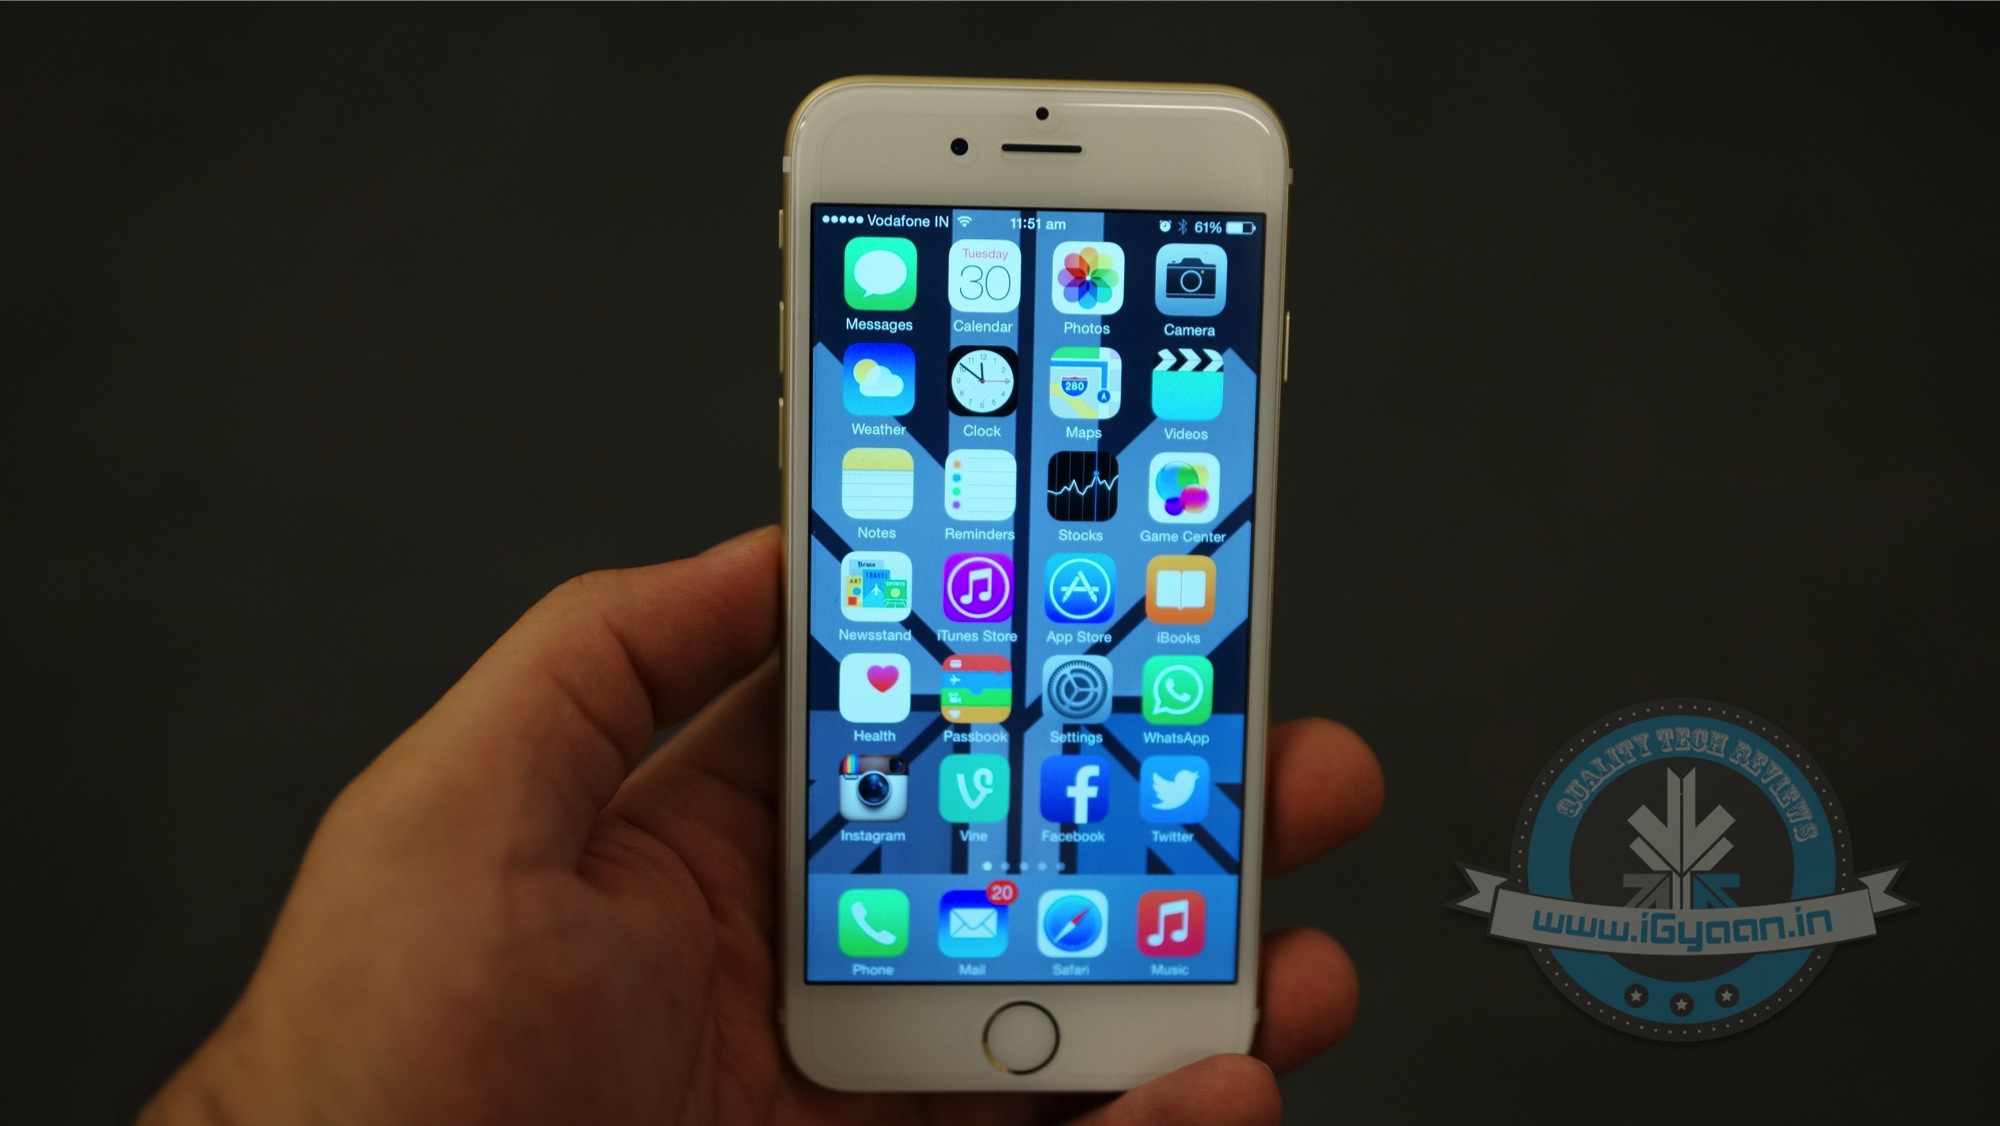 iPhone 6 Review - iGyaan.in - Price in India, Specifications, Video